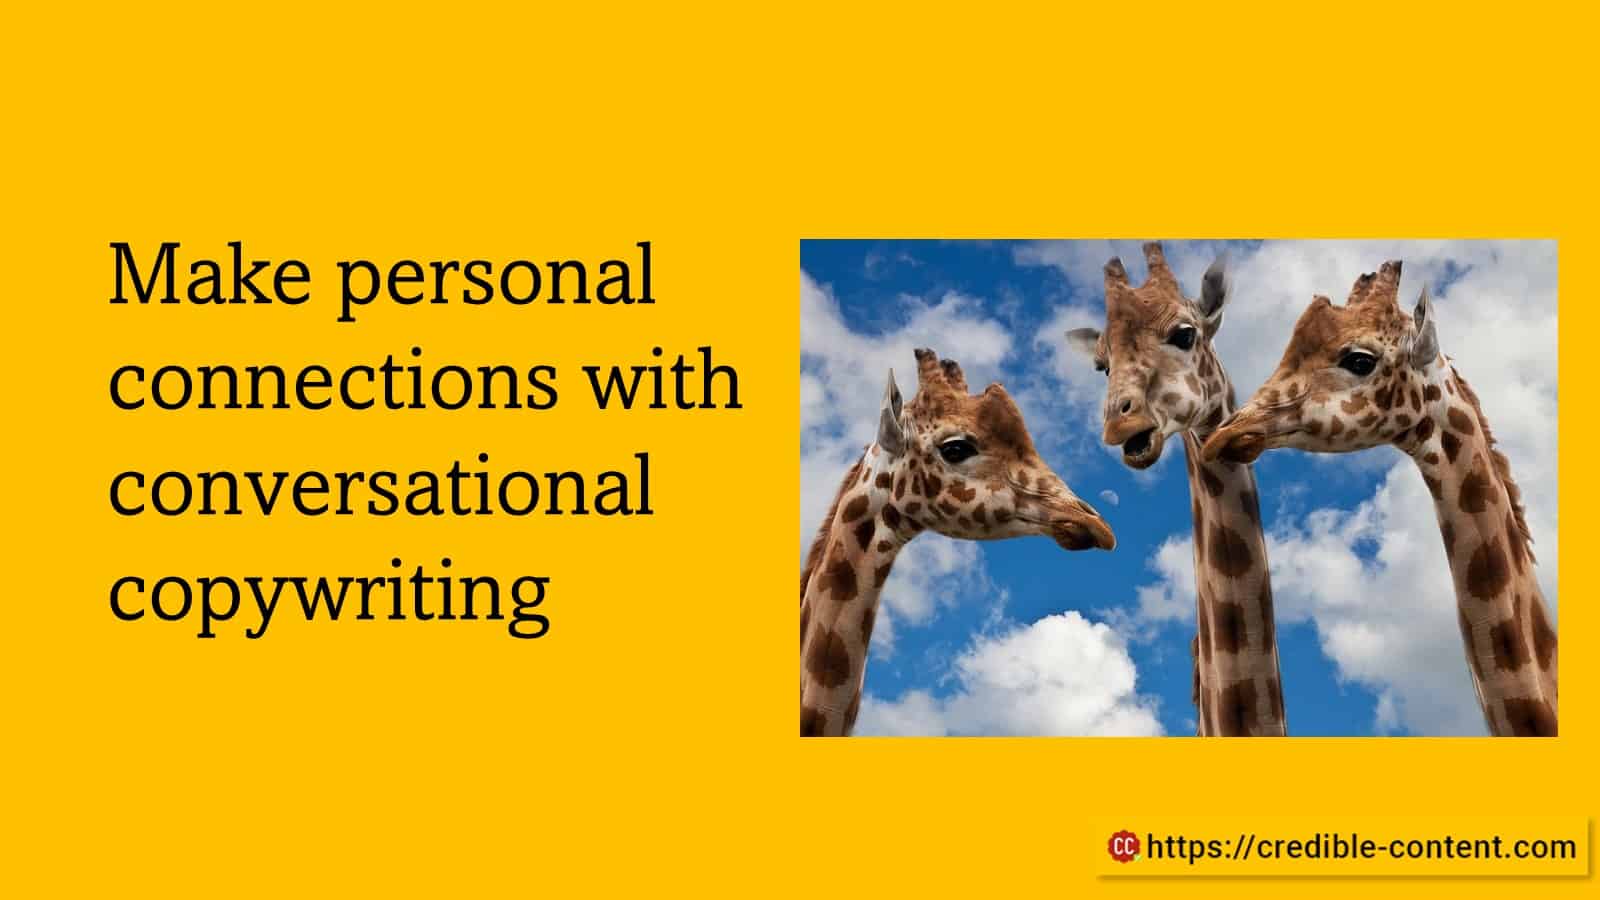 Make personal connections with conversational copywriting